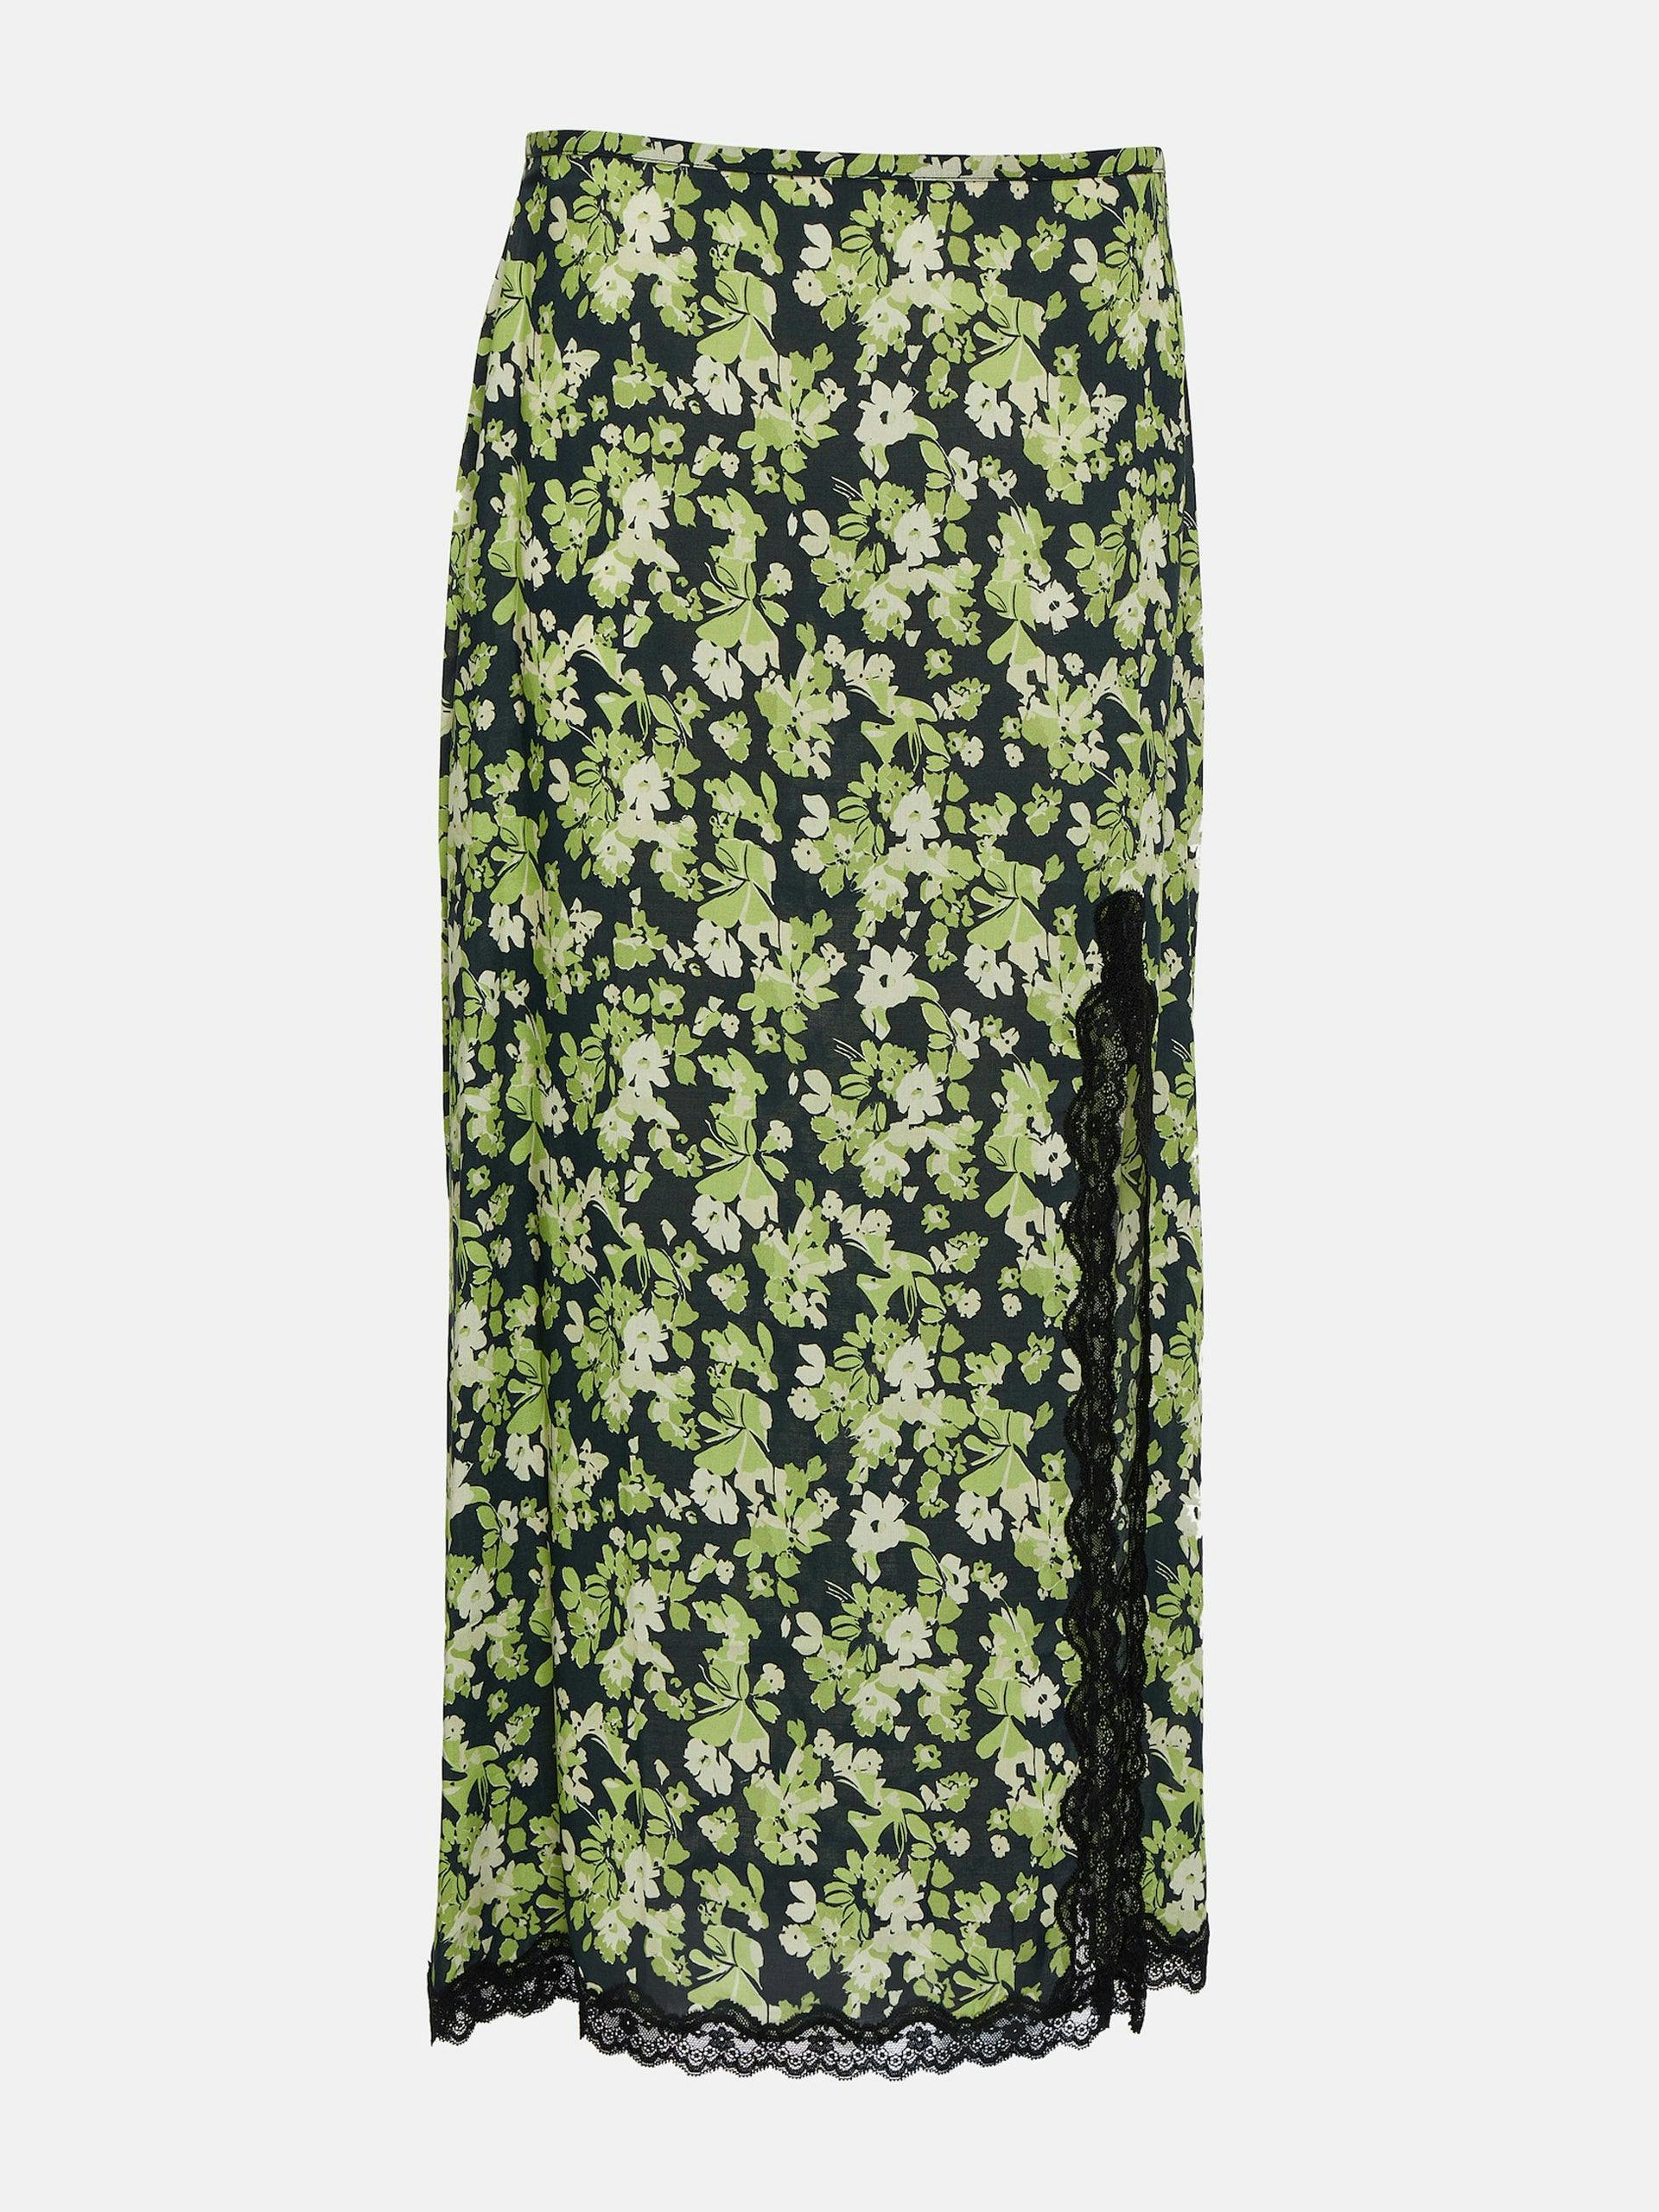 Green floral lace-trimmed midi skirt